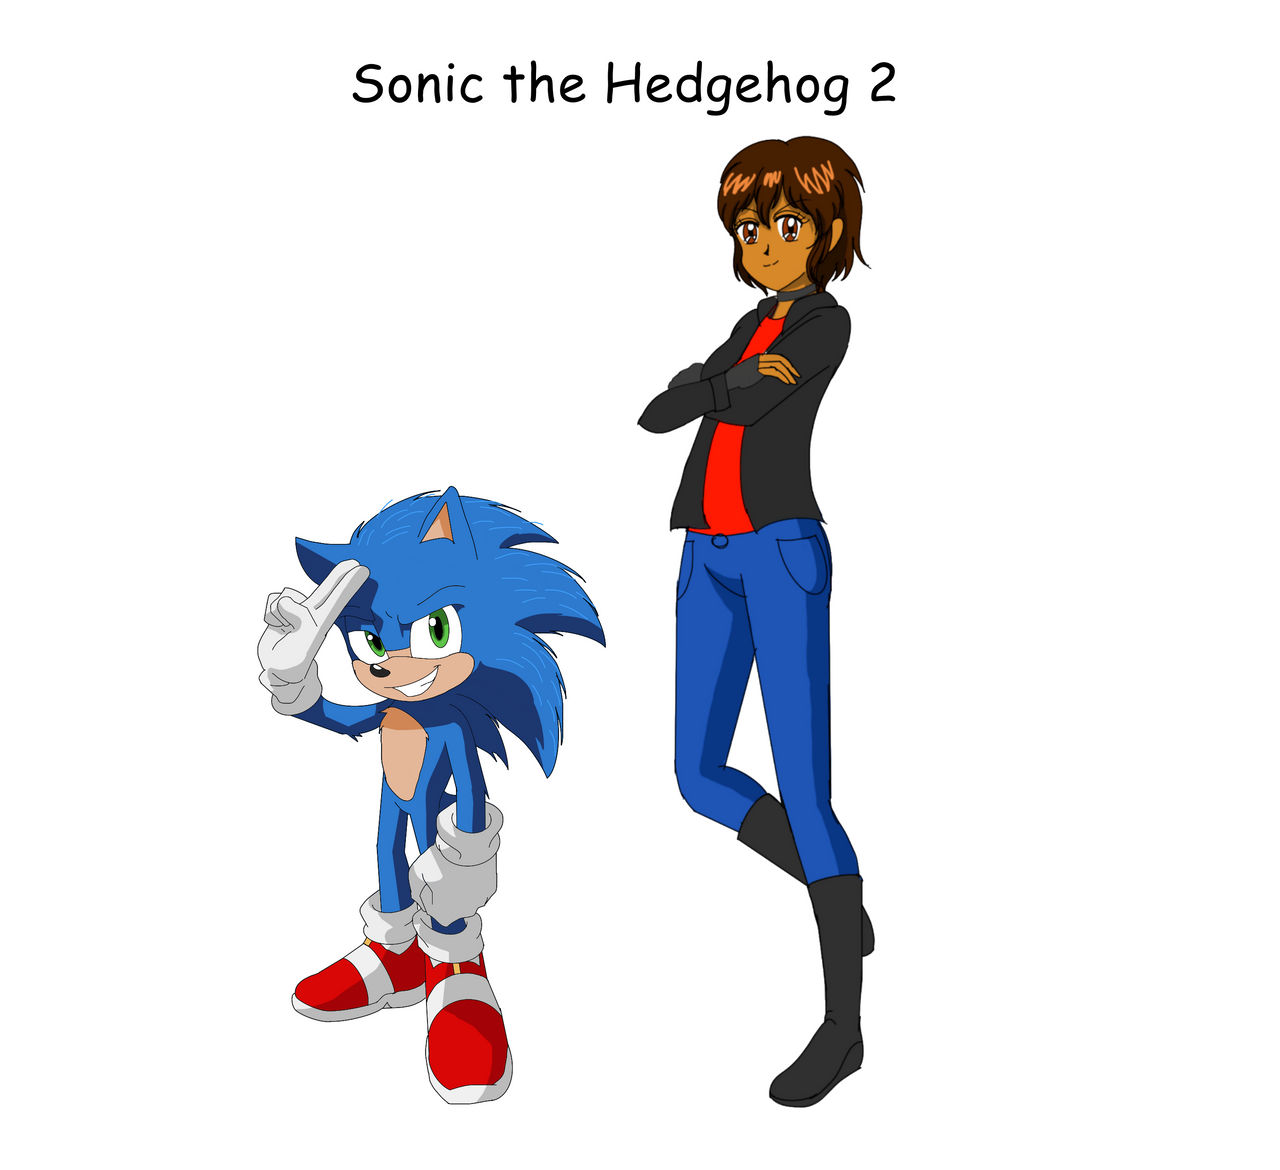 Sonic the Hedgehog Movie Characters Collection by Jame5rheneaZ on DeviantArt